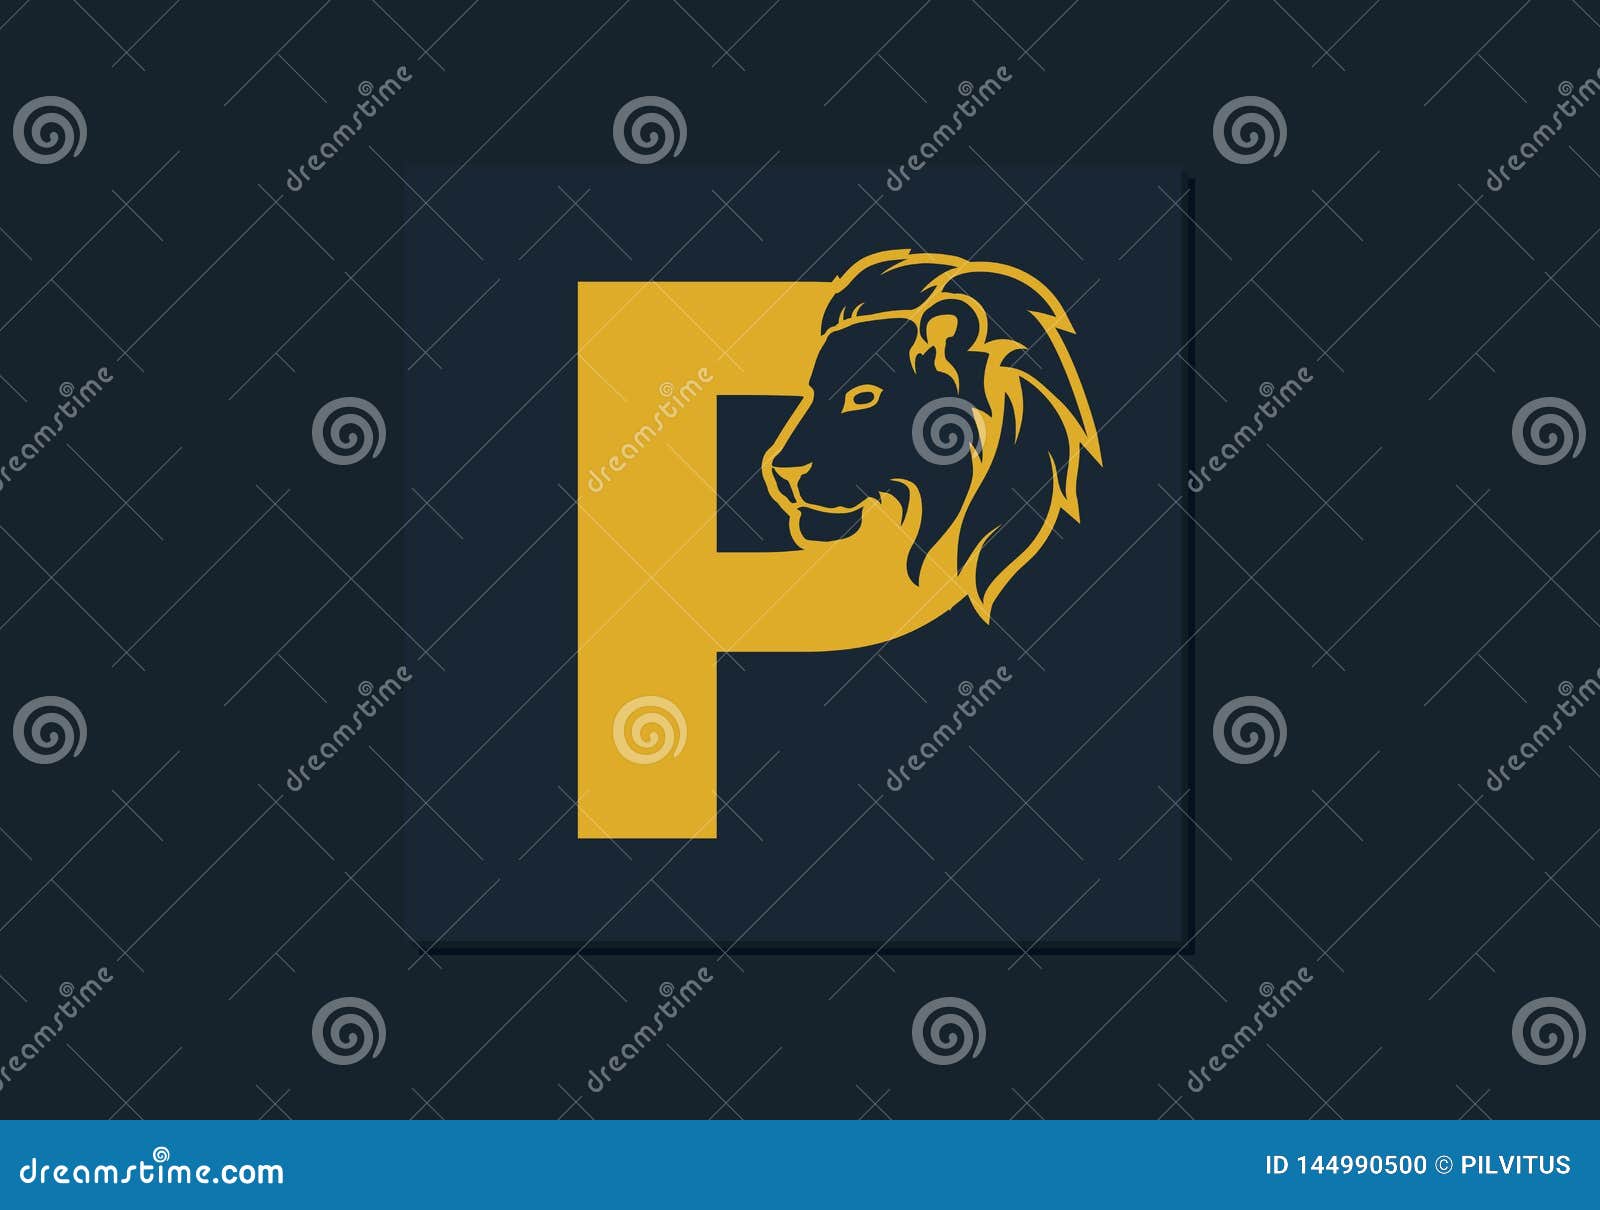 Lion Head Inside Letter P. Abstract, Creative Emblem For Logotype, Brand Identity, Company ...